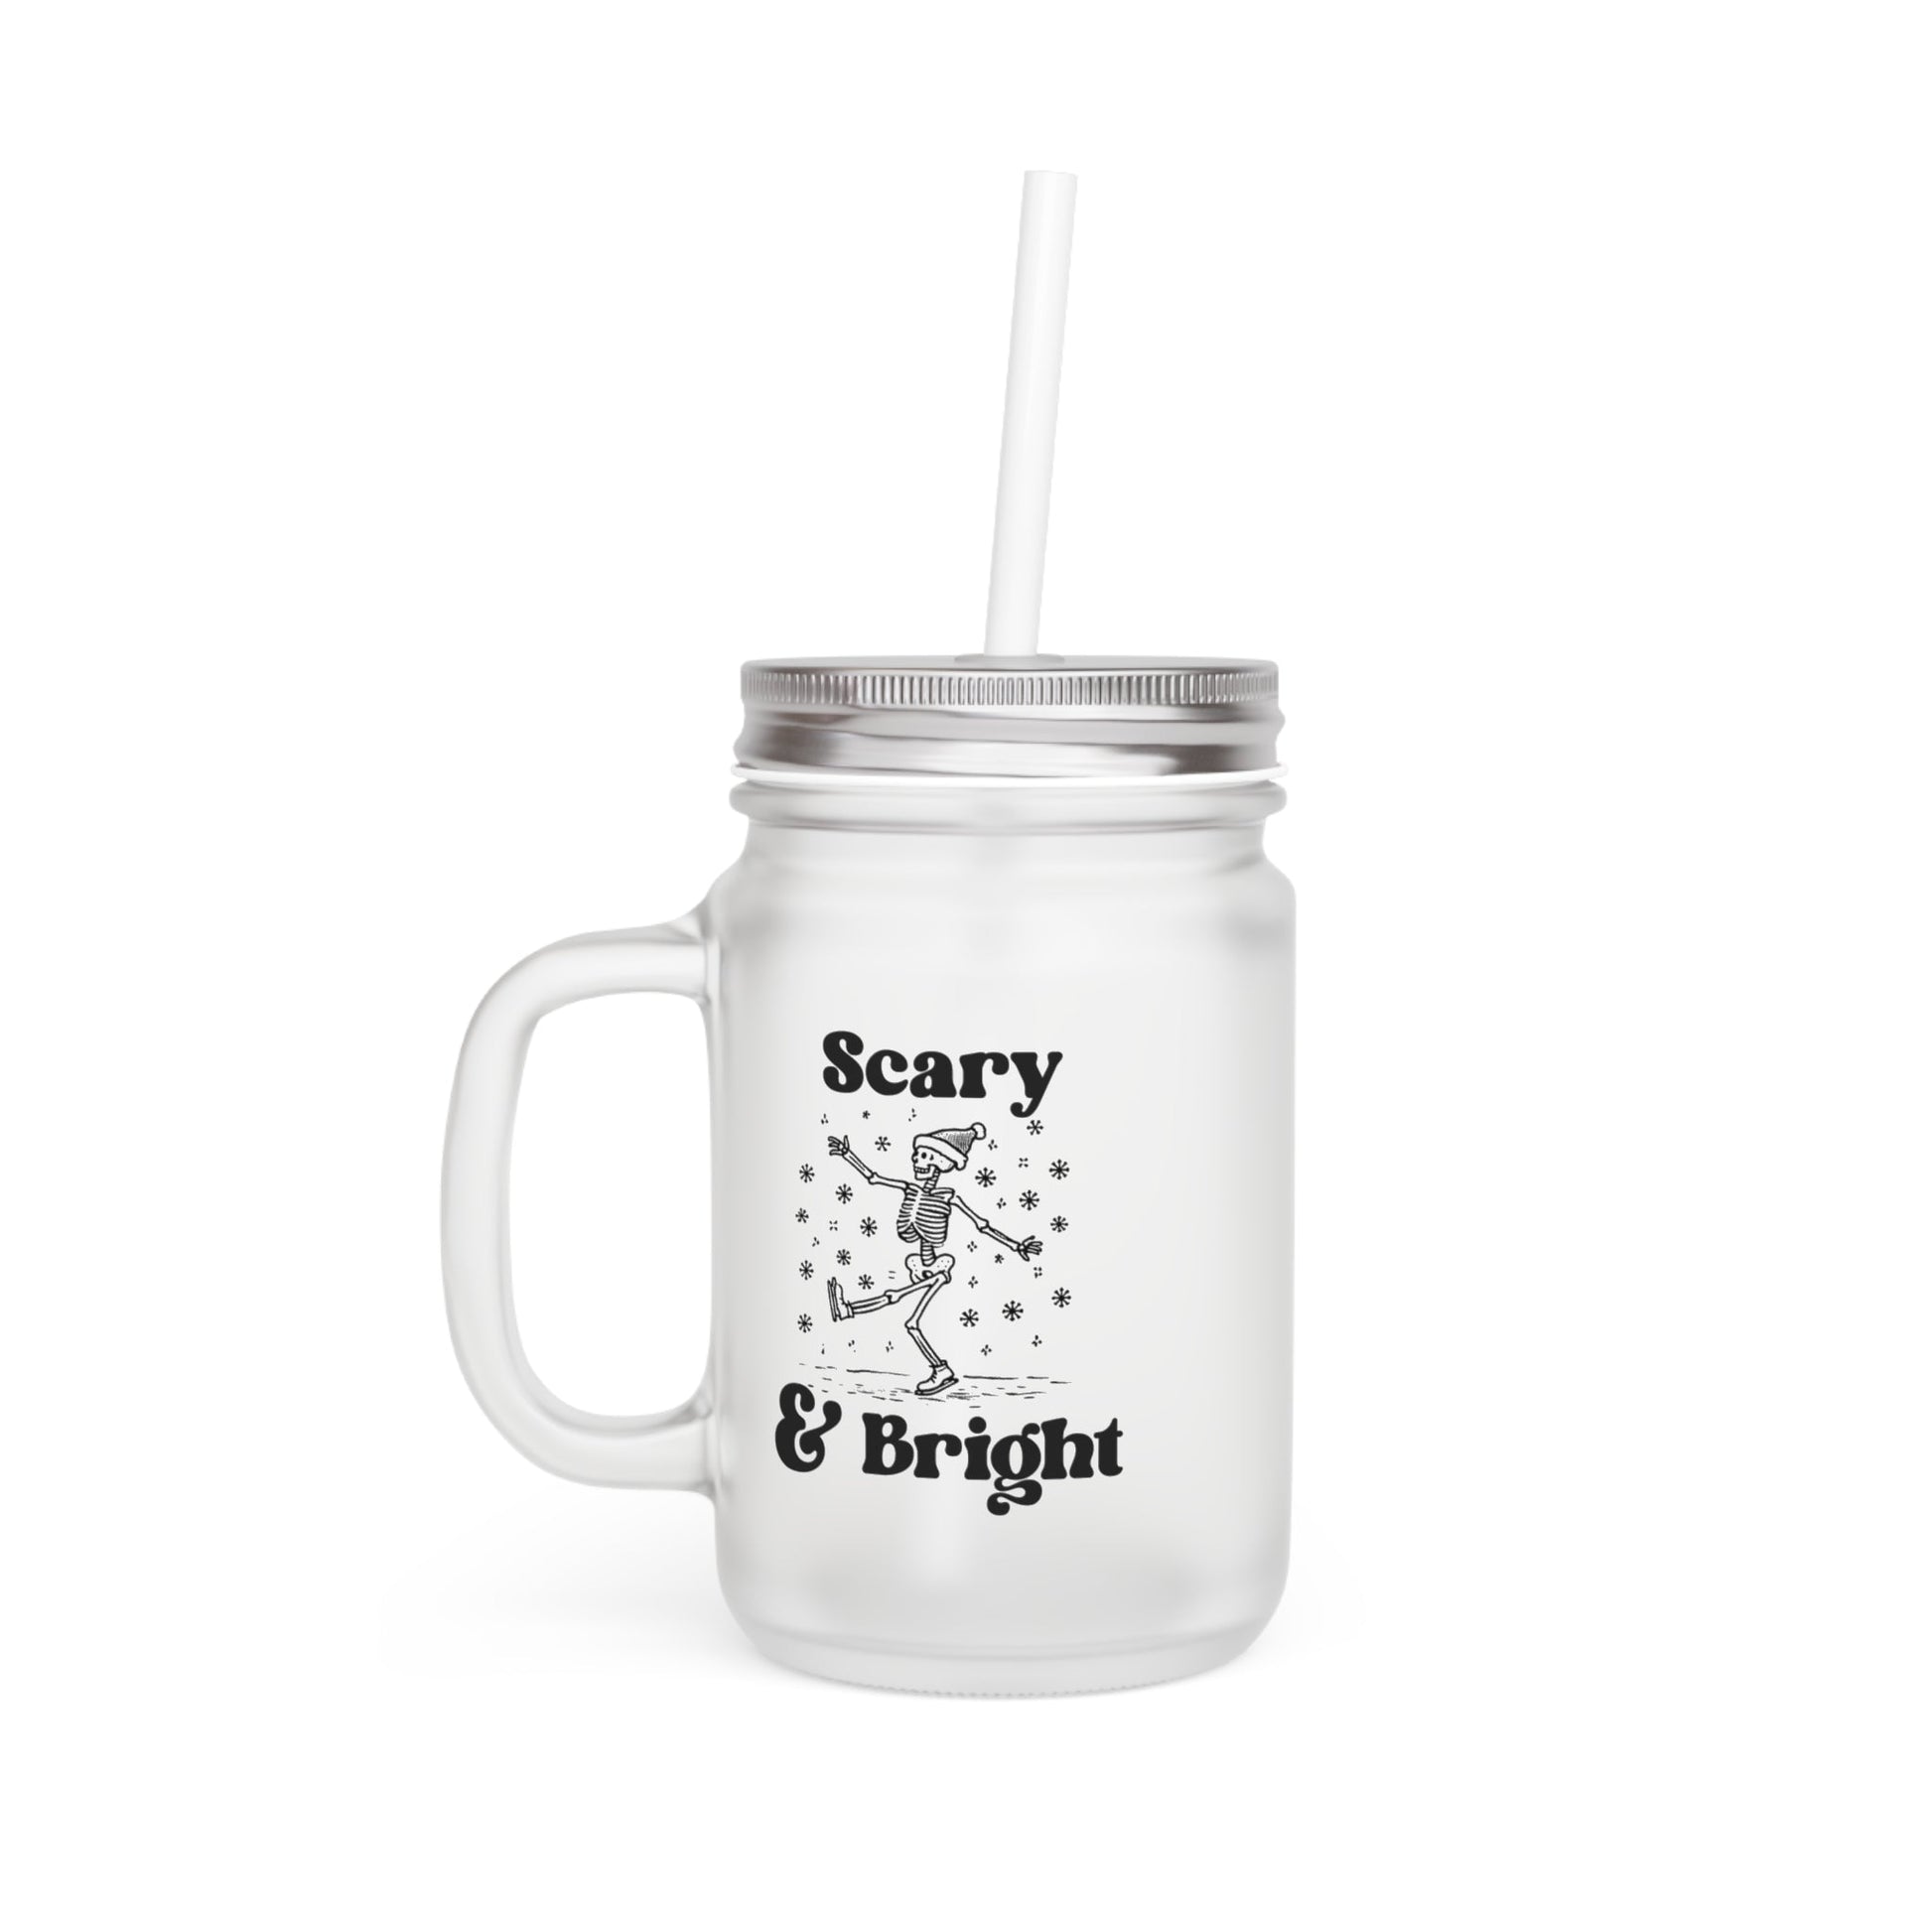 Scary and Bright Mason Jar CupMugVTZdesigns12ozTransparentFrosted12 ozBottleschristmas